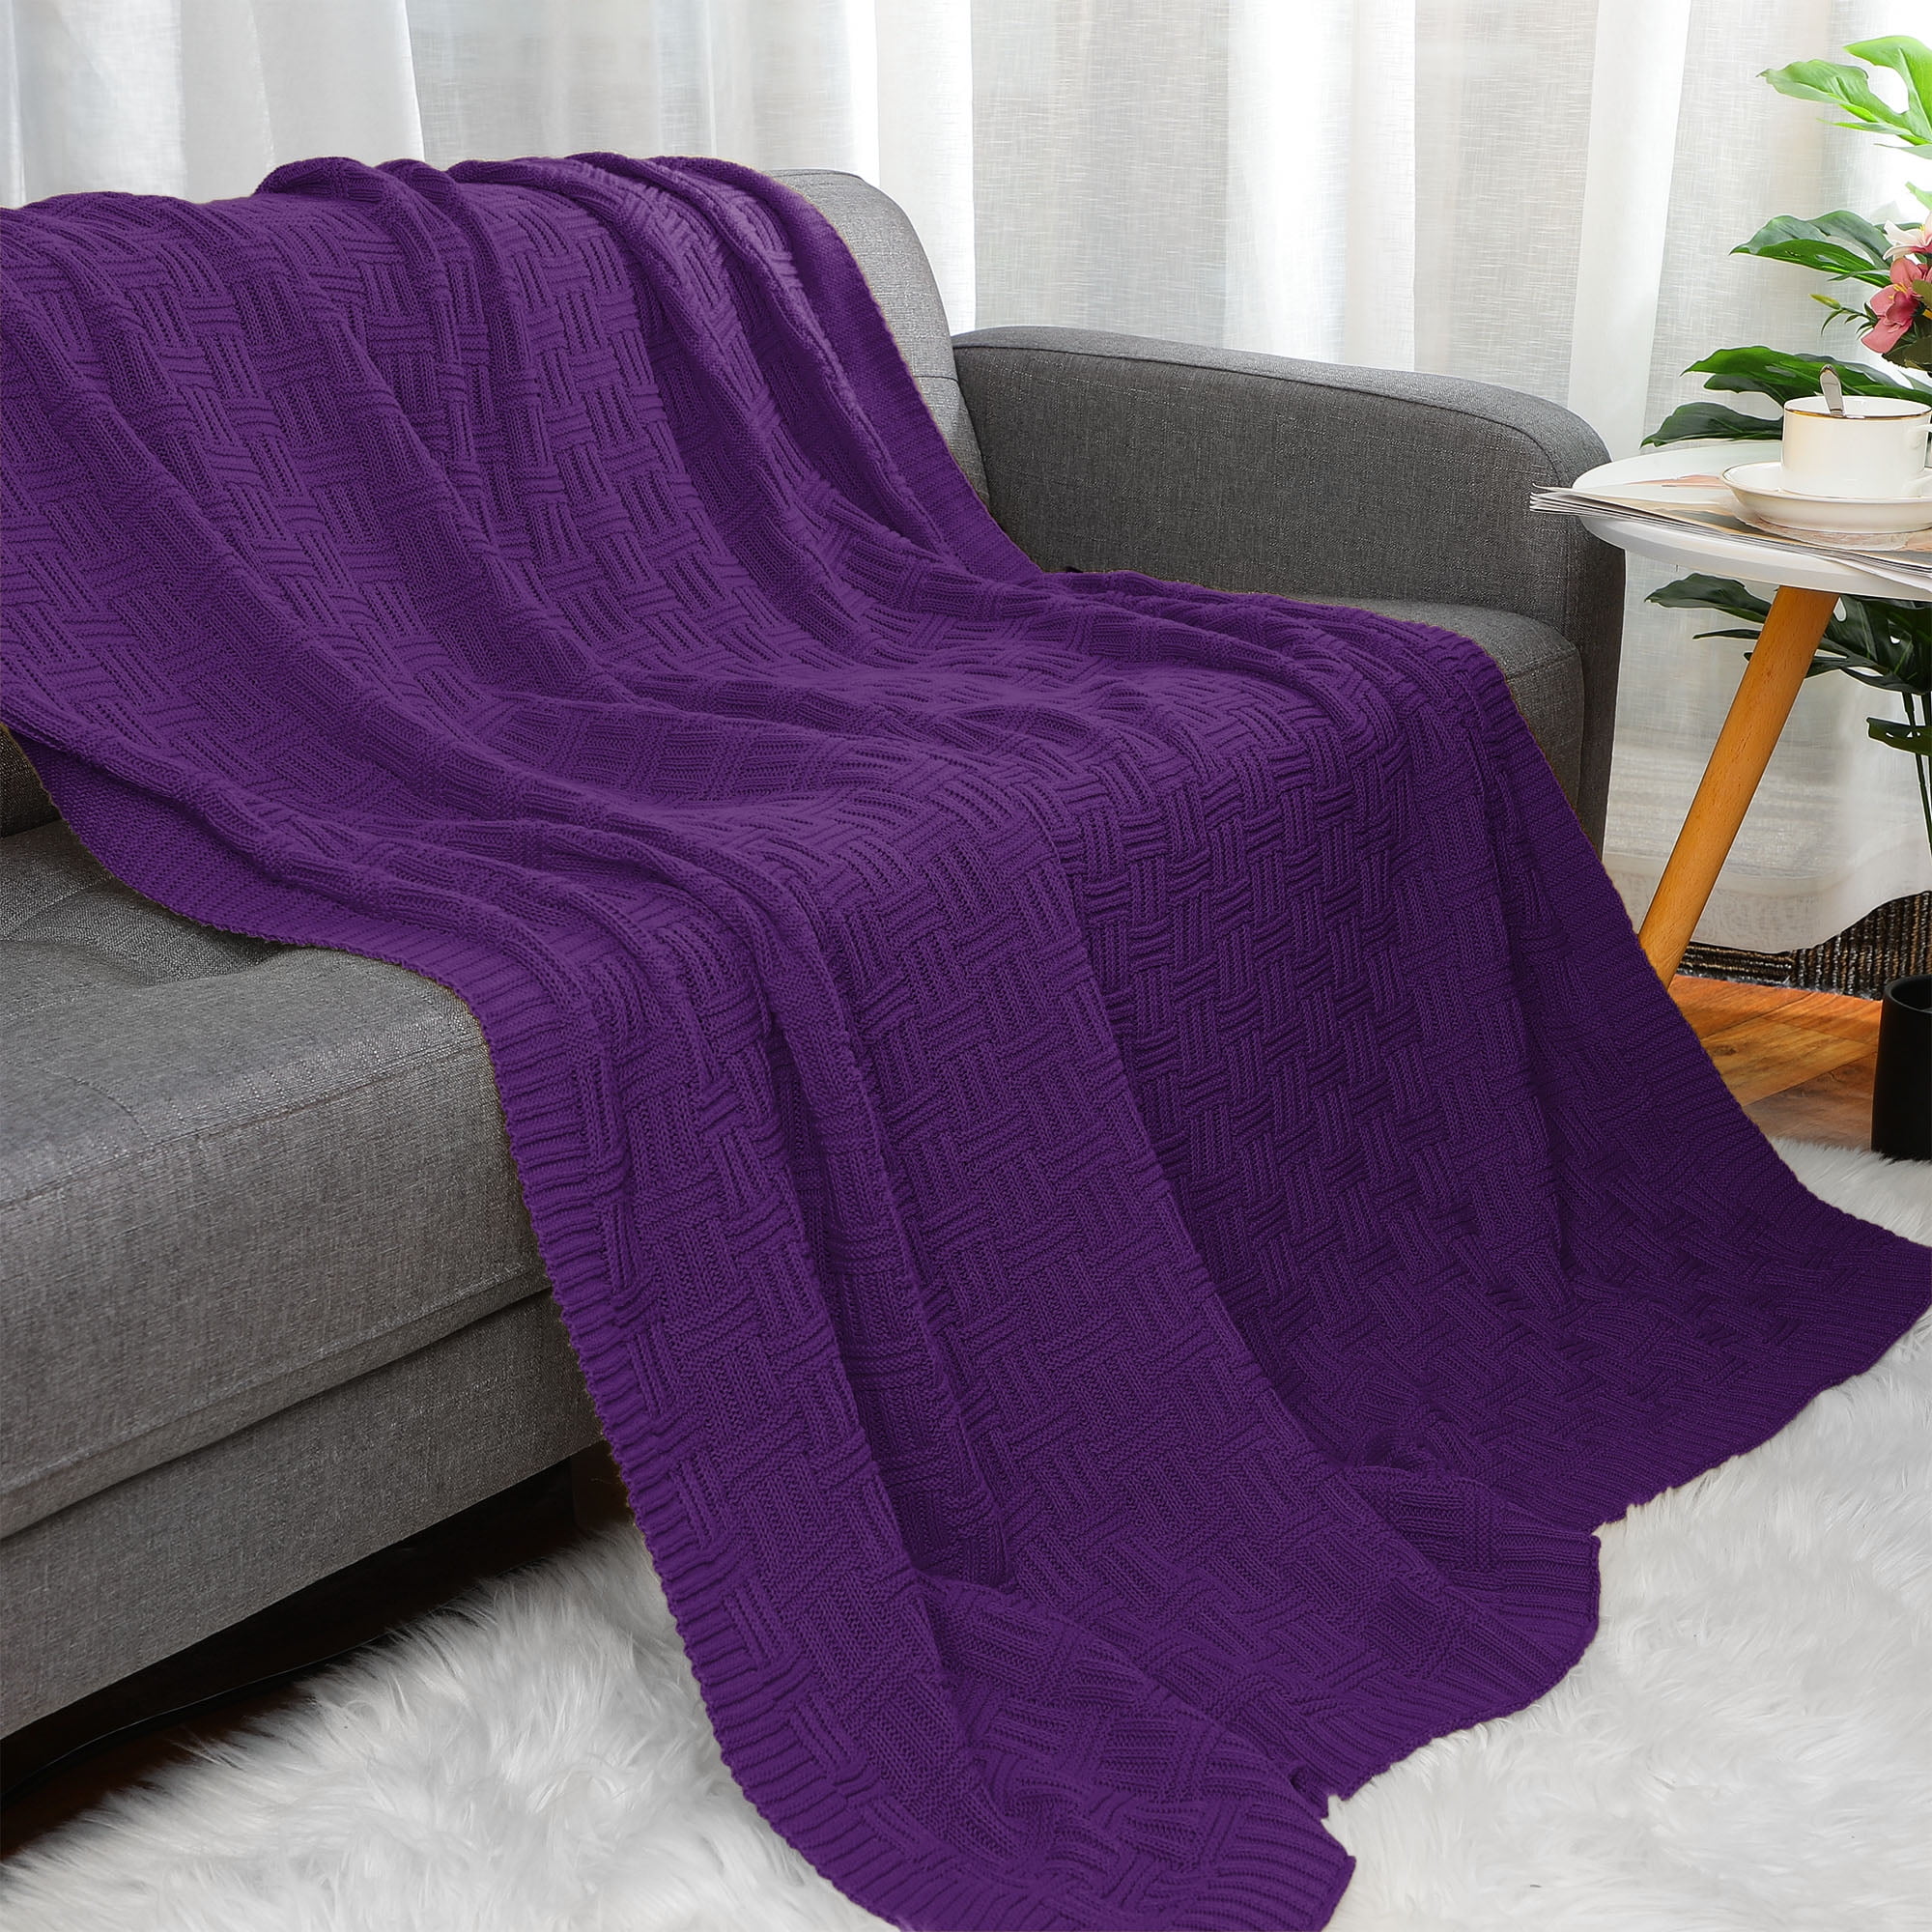 Knitted Throw Blanket For Sofa Couch Soft 100 Cotton Home Office Blanket Purple Walmart Canada